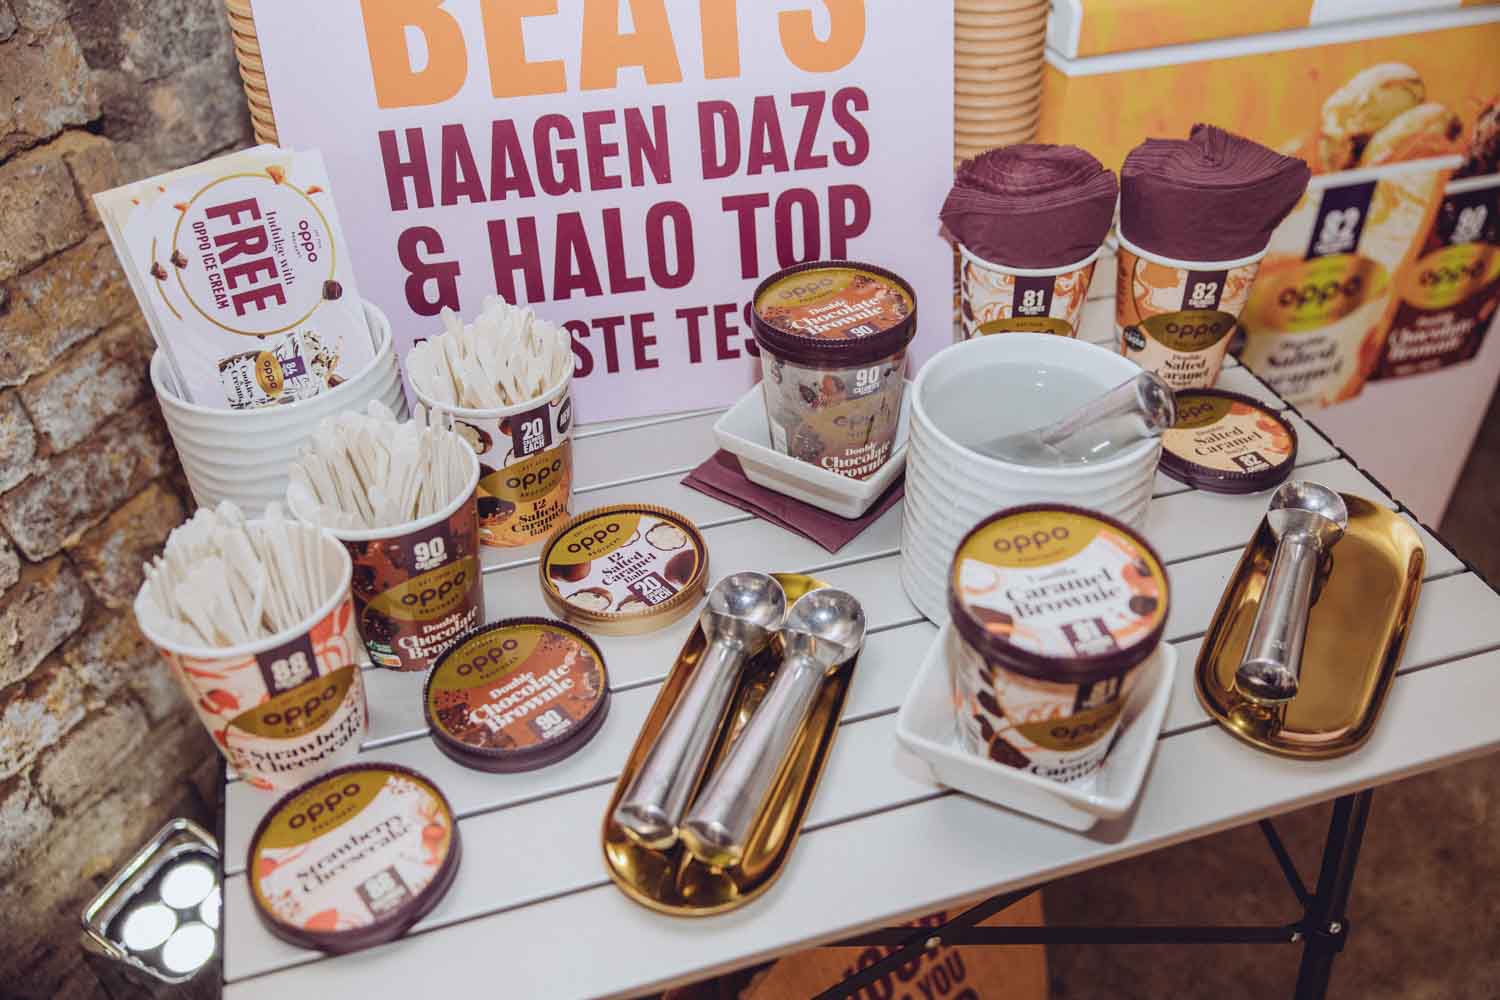 Oppo Brothers ice cream at at Blogosphere Beauty Creator Show